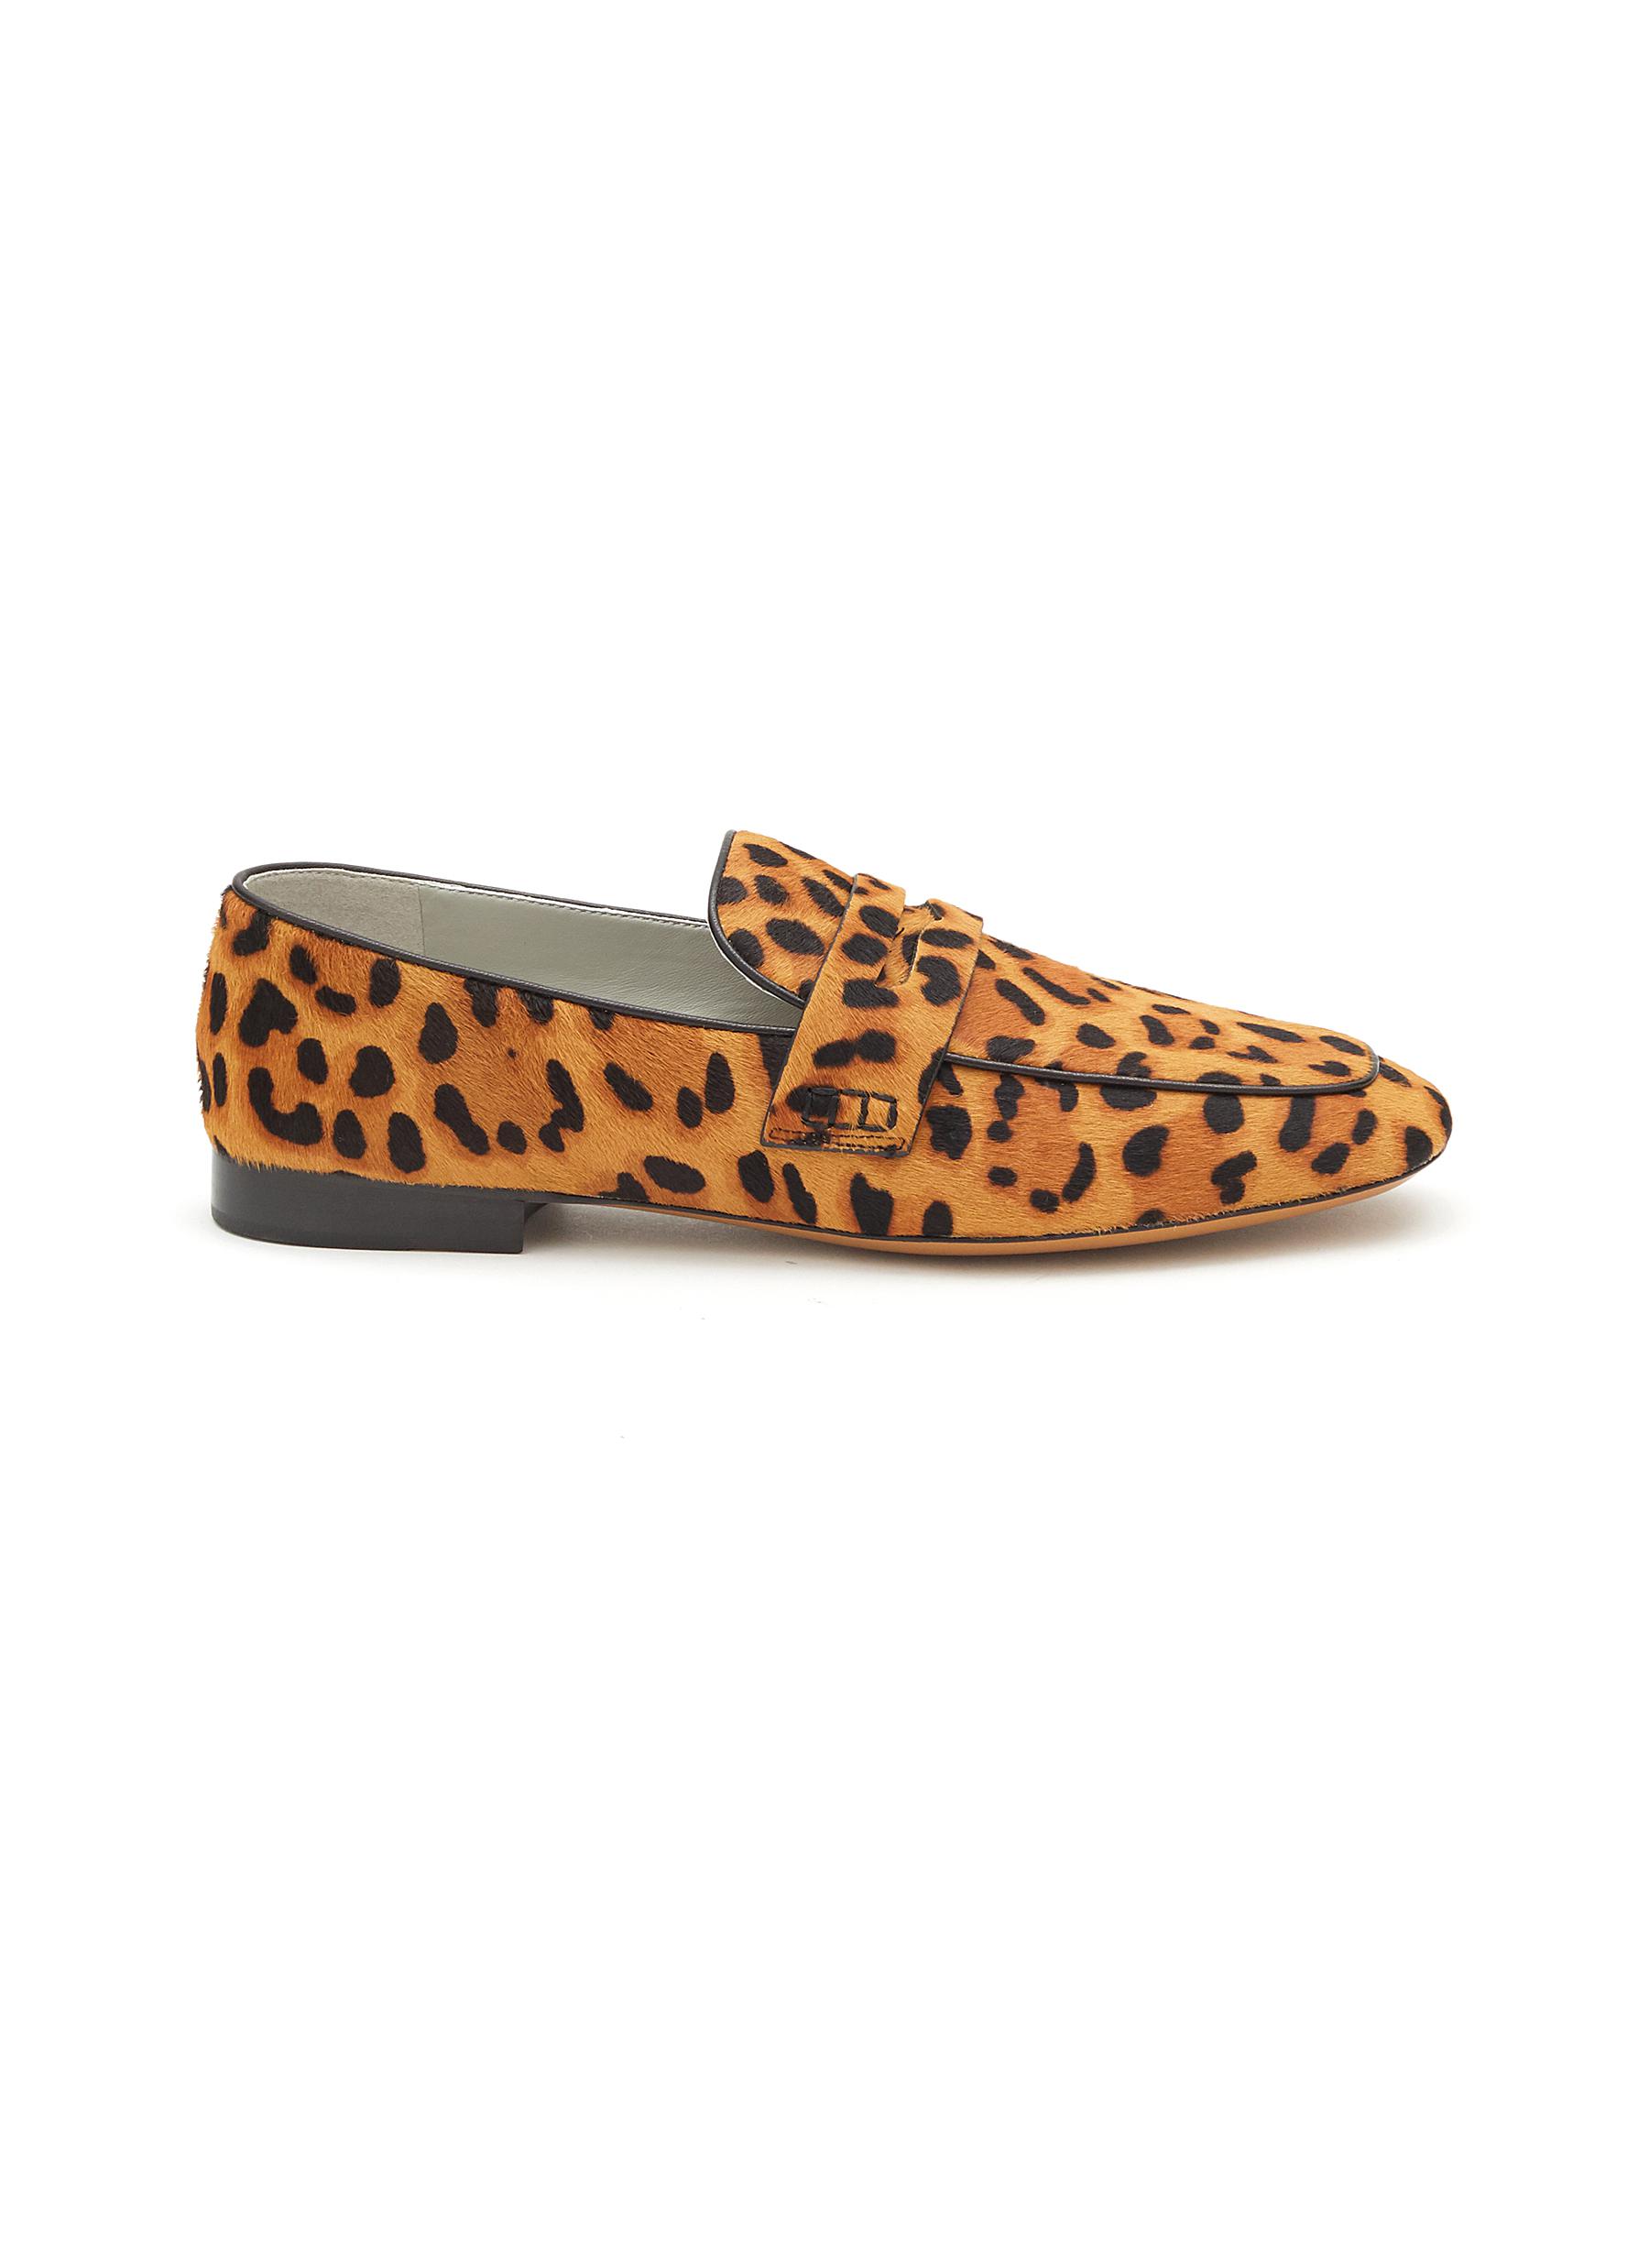 Equil 'london' Leopard Print Leather Penny Loafers In Multi-colour |  ModeSens